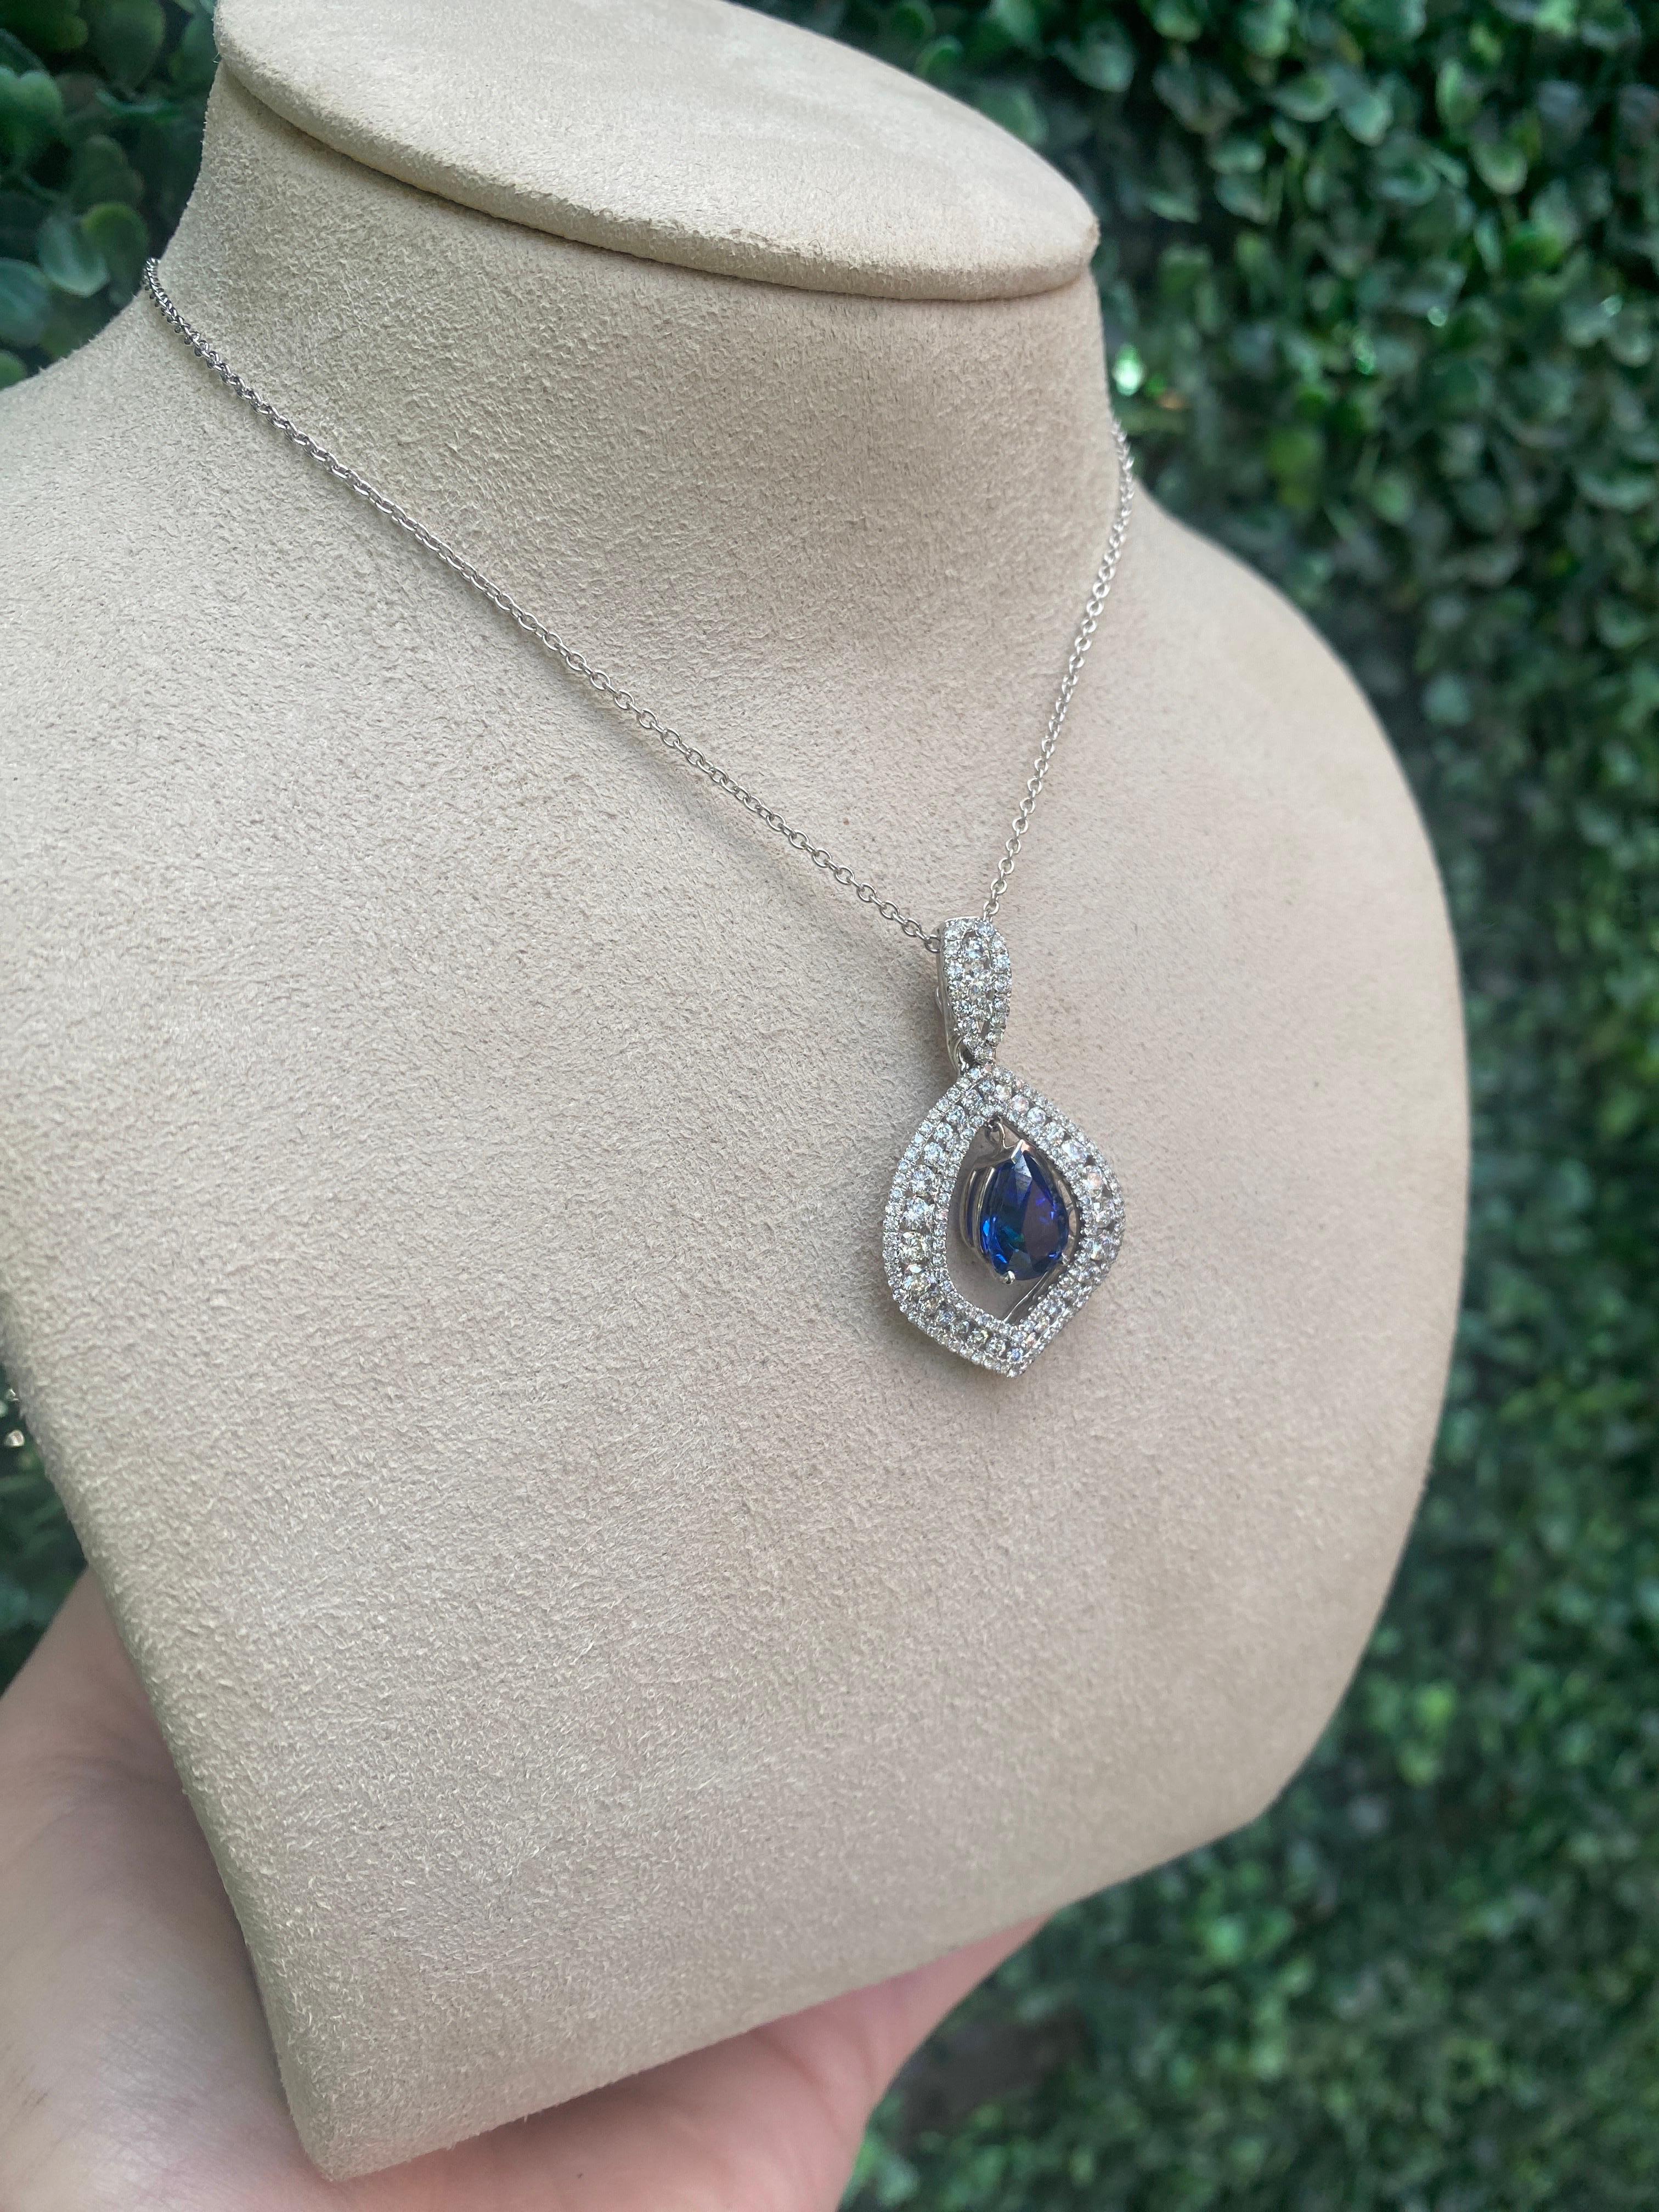 GIA Certified 3.30 Carat Pear Shaped Madagascar Sapphire & Diamond Necklace  1